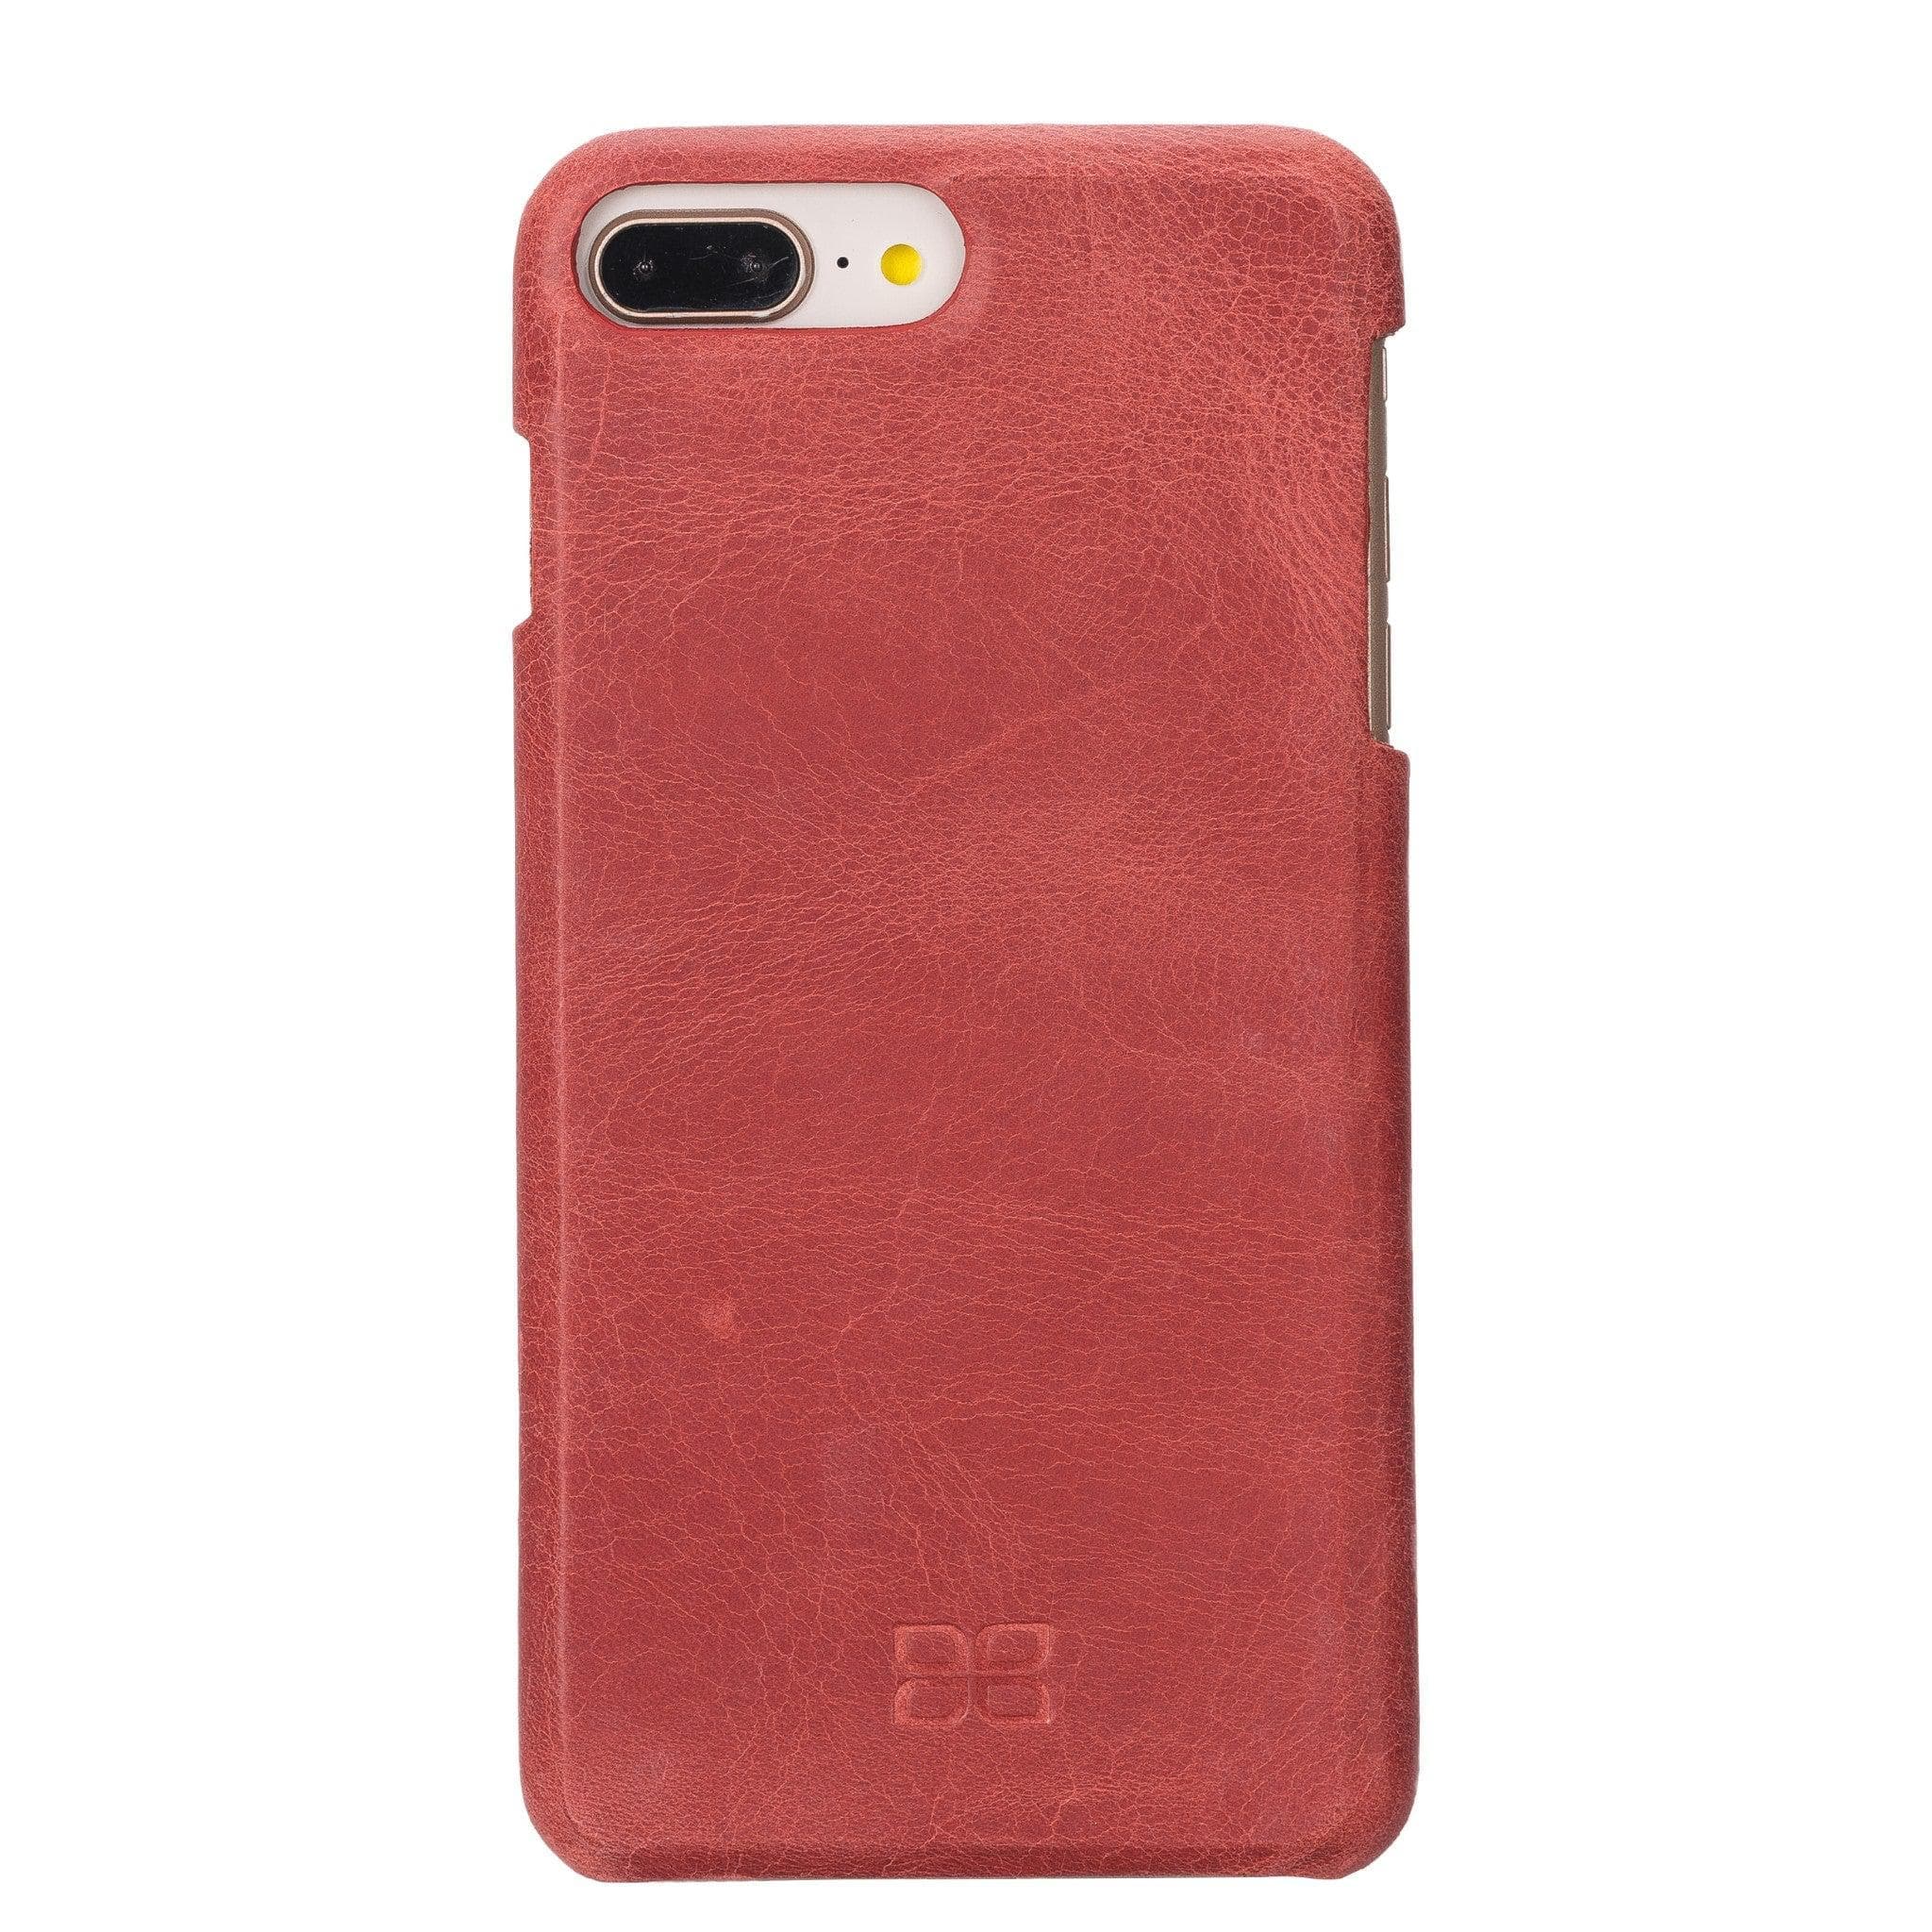 Apple iPhone 8 Series Fully Covering Leather Back Cover Case iPhone 8 / Mat Red Bouletta LTD